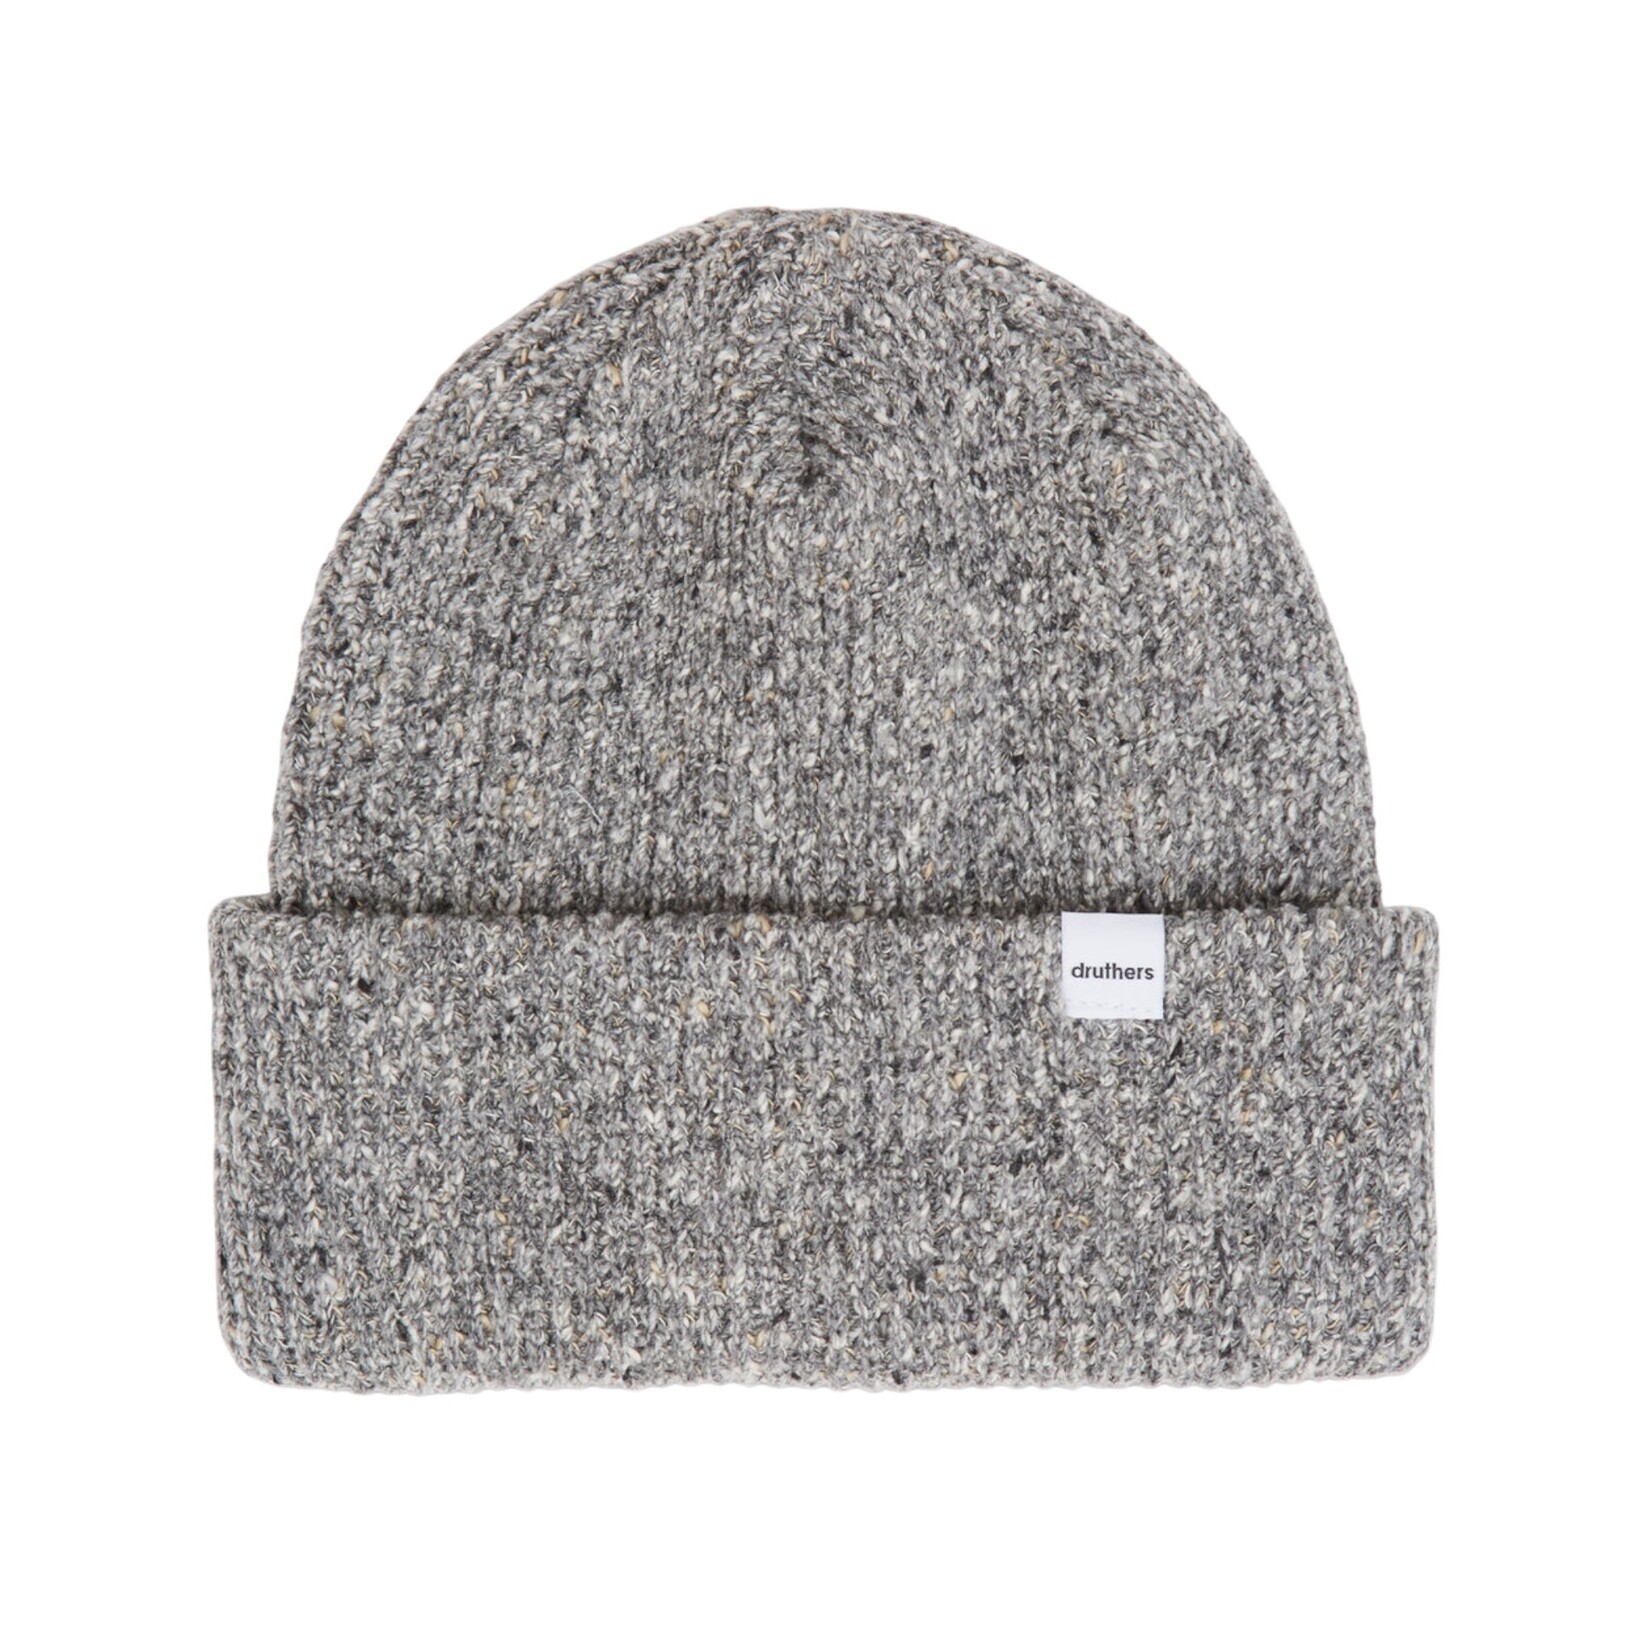 Druthers NYC Druthers Recycled Cotton Melange 1X1 Rib Beanie Grey